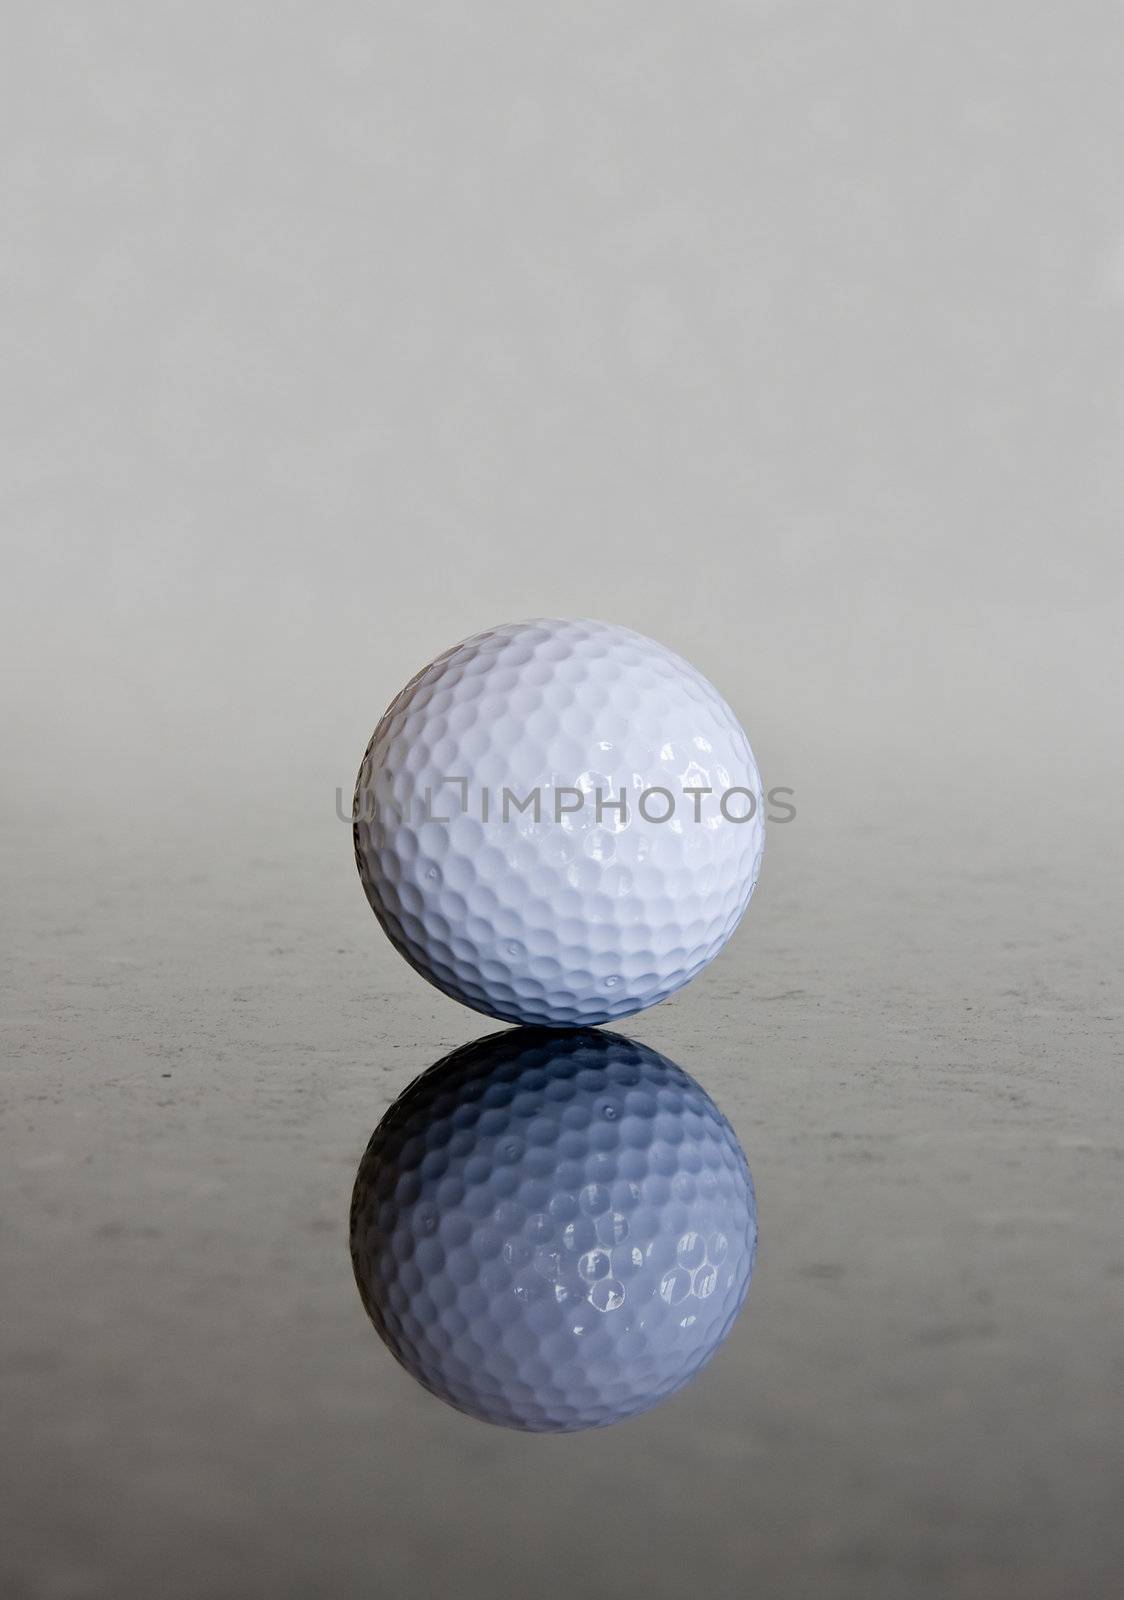 Single golf ball reflecting off a shiny marble surface